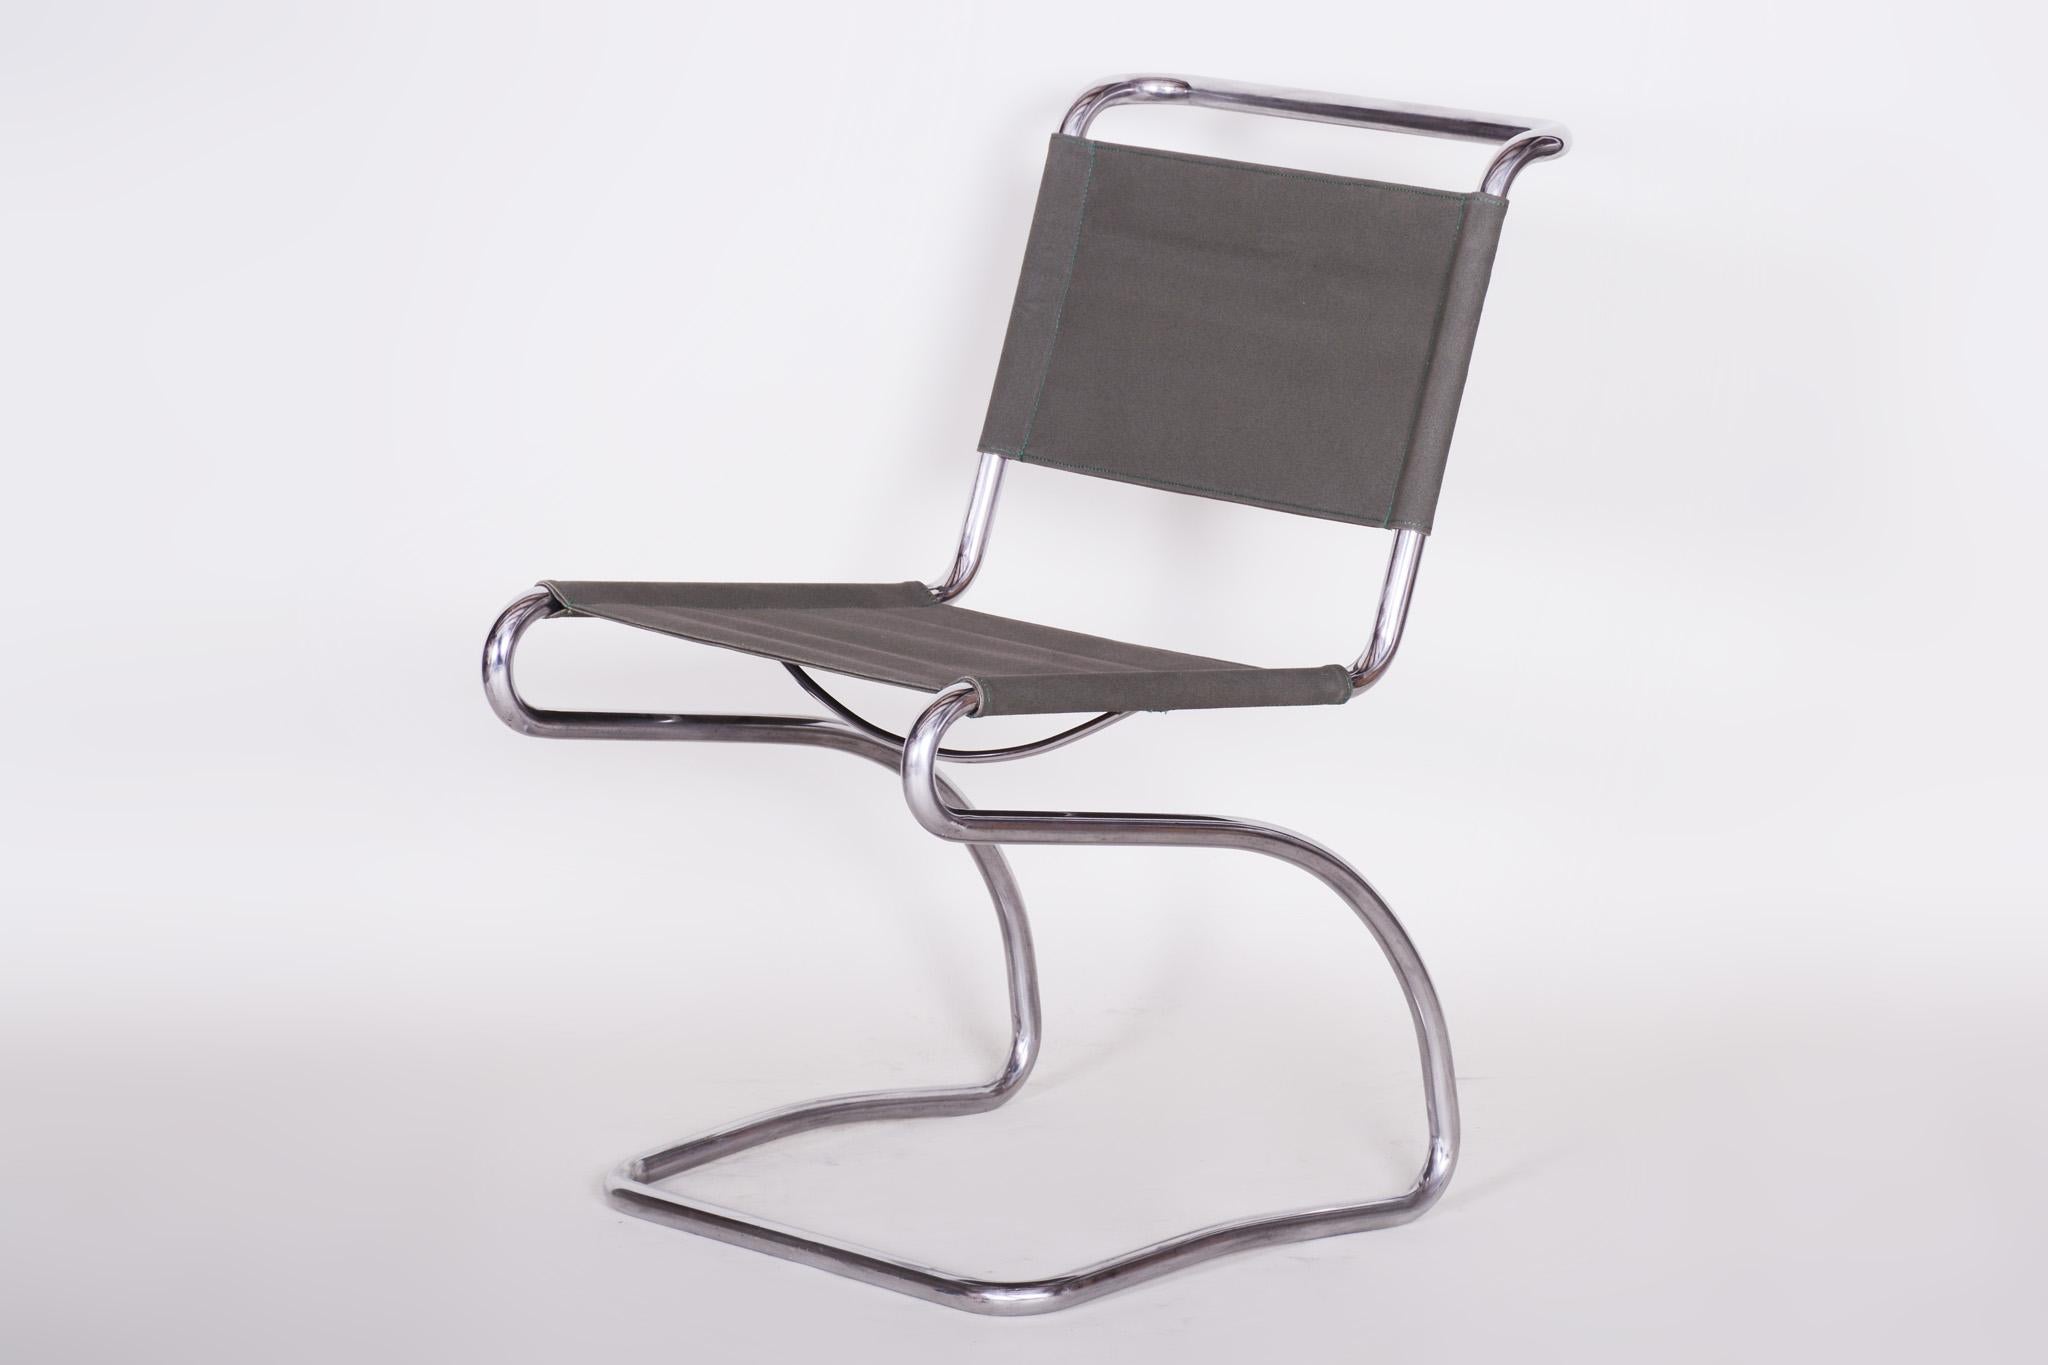 Double suspension chair.

This original Bauhaus chair manufactured by UP Zavody Brno and Designed by Jindrich Halabala are a perfect representation of the simplistic elegance of the Bauhaus Era.

Model number: H-79
Designer: Jindrich